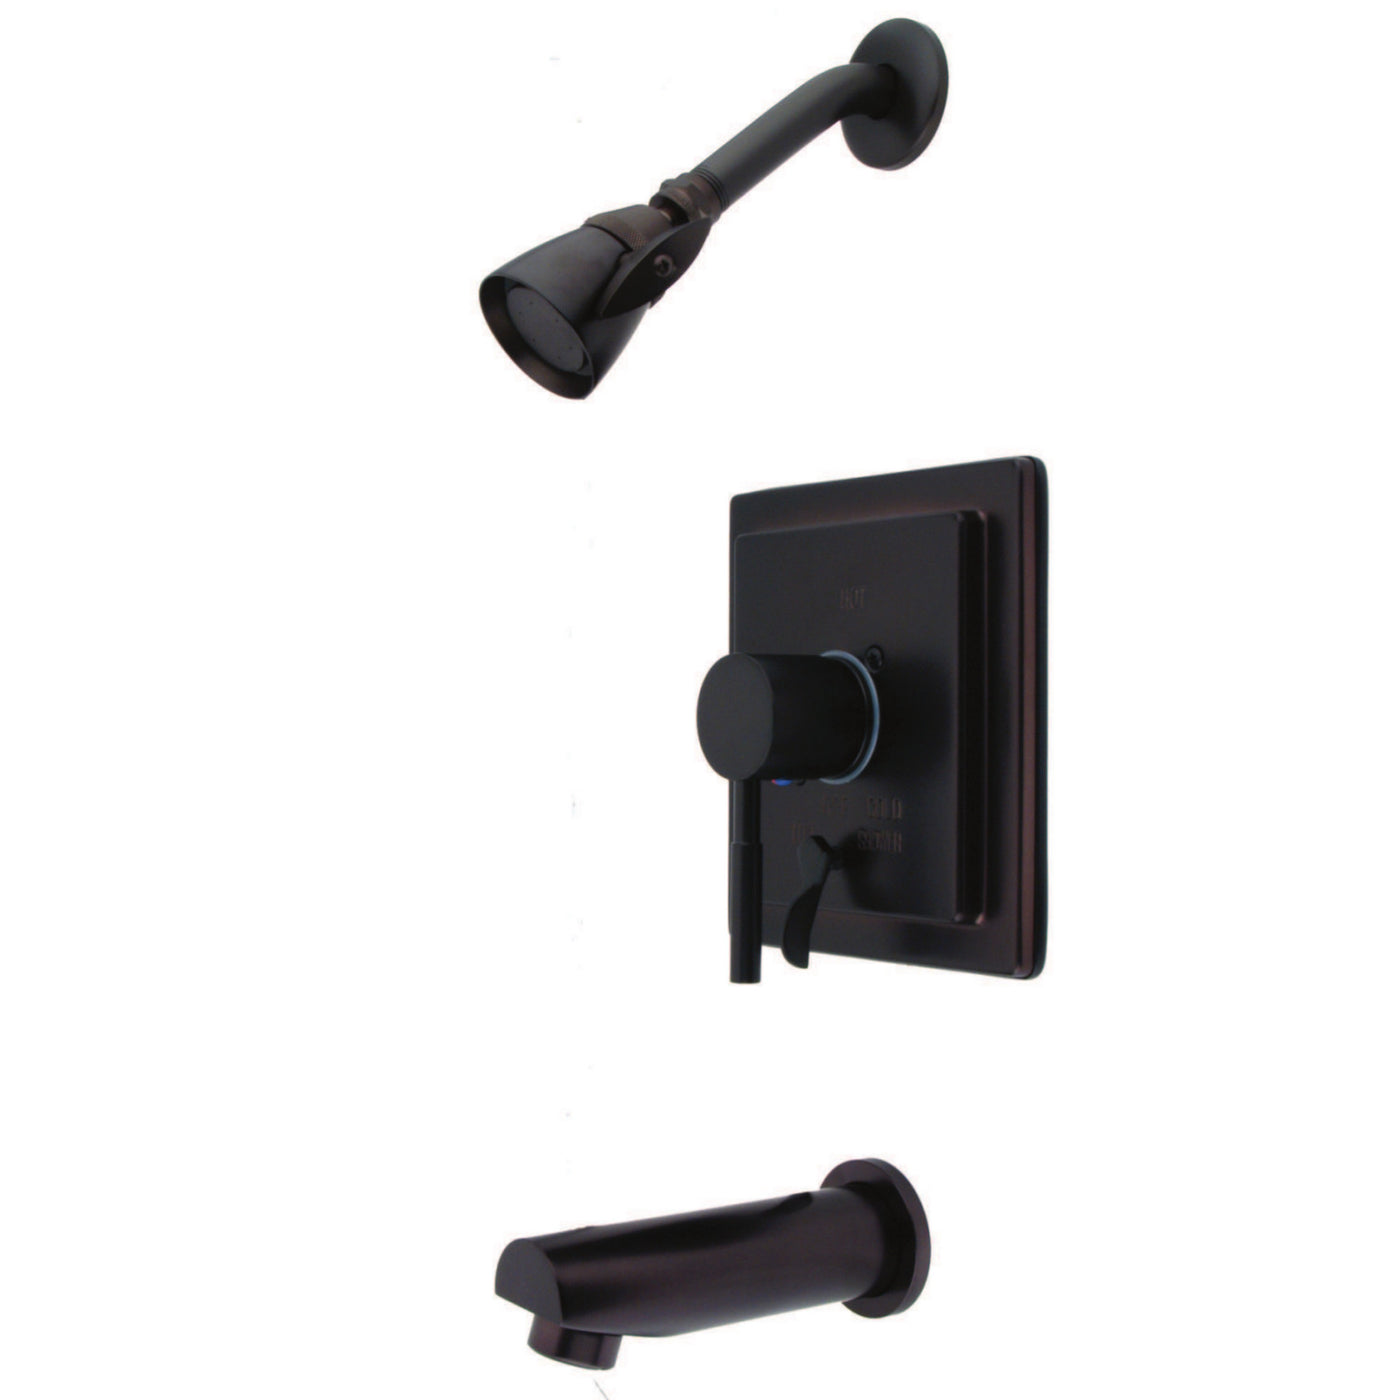 Elements of Design EB86550DL Single-Handle Tub and Shower Faucet, Oil Rubbed Bronze